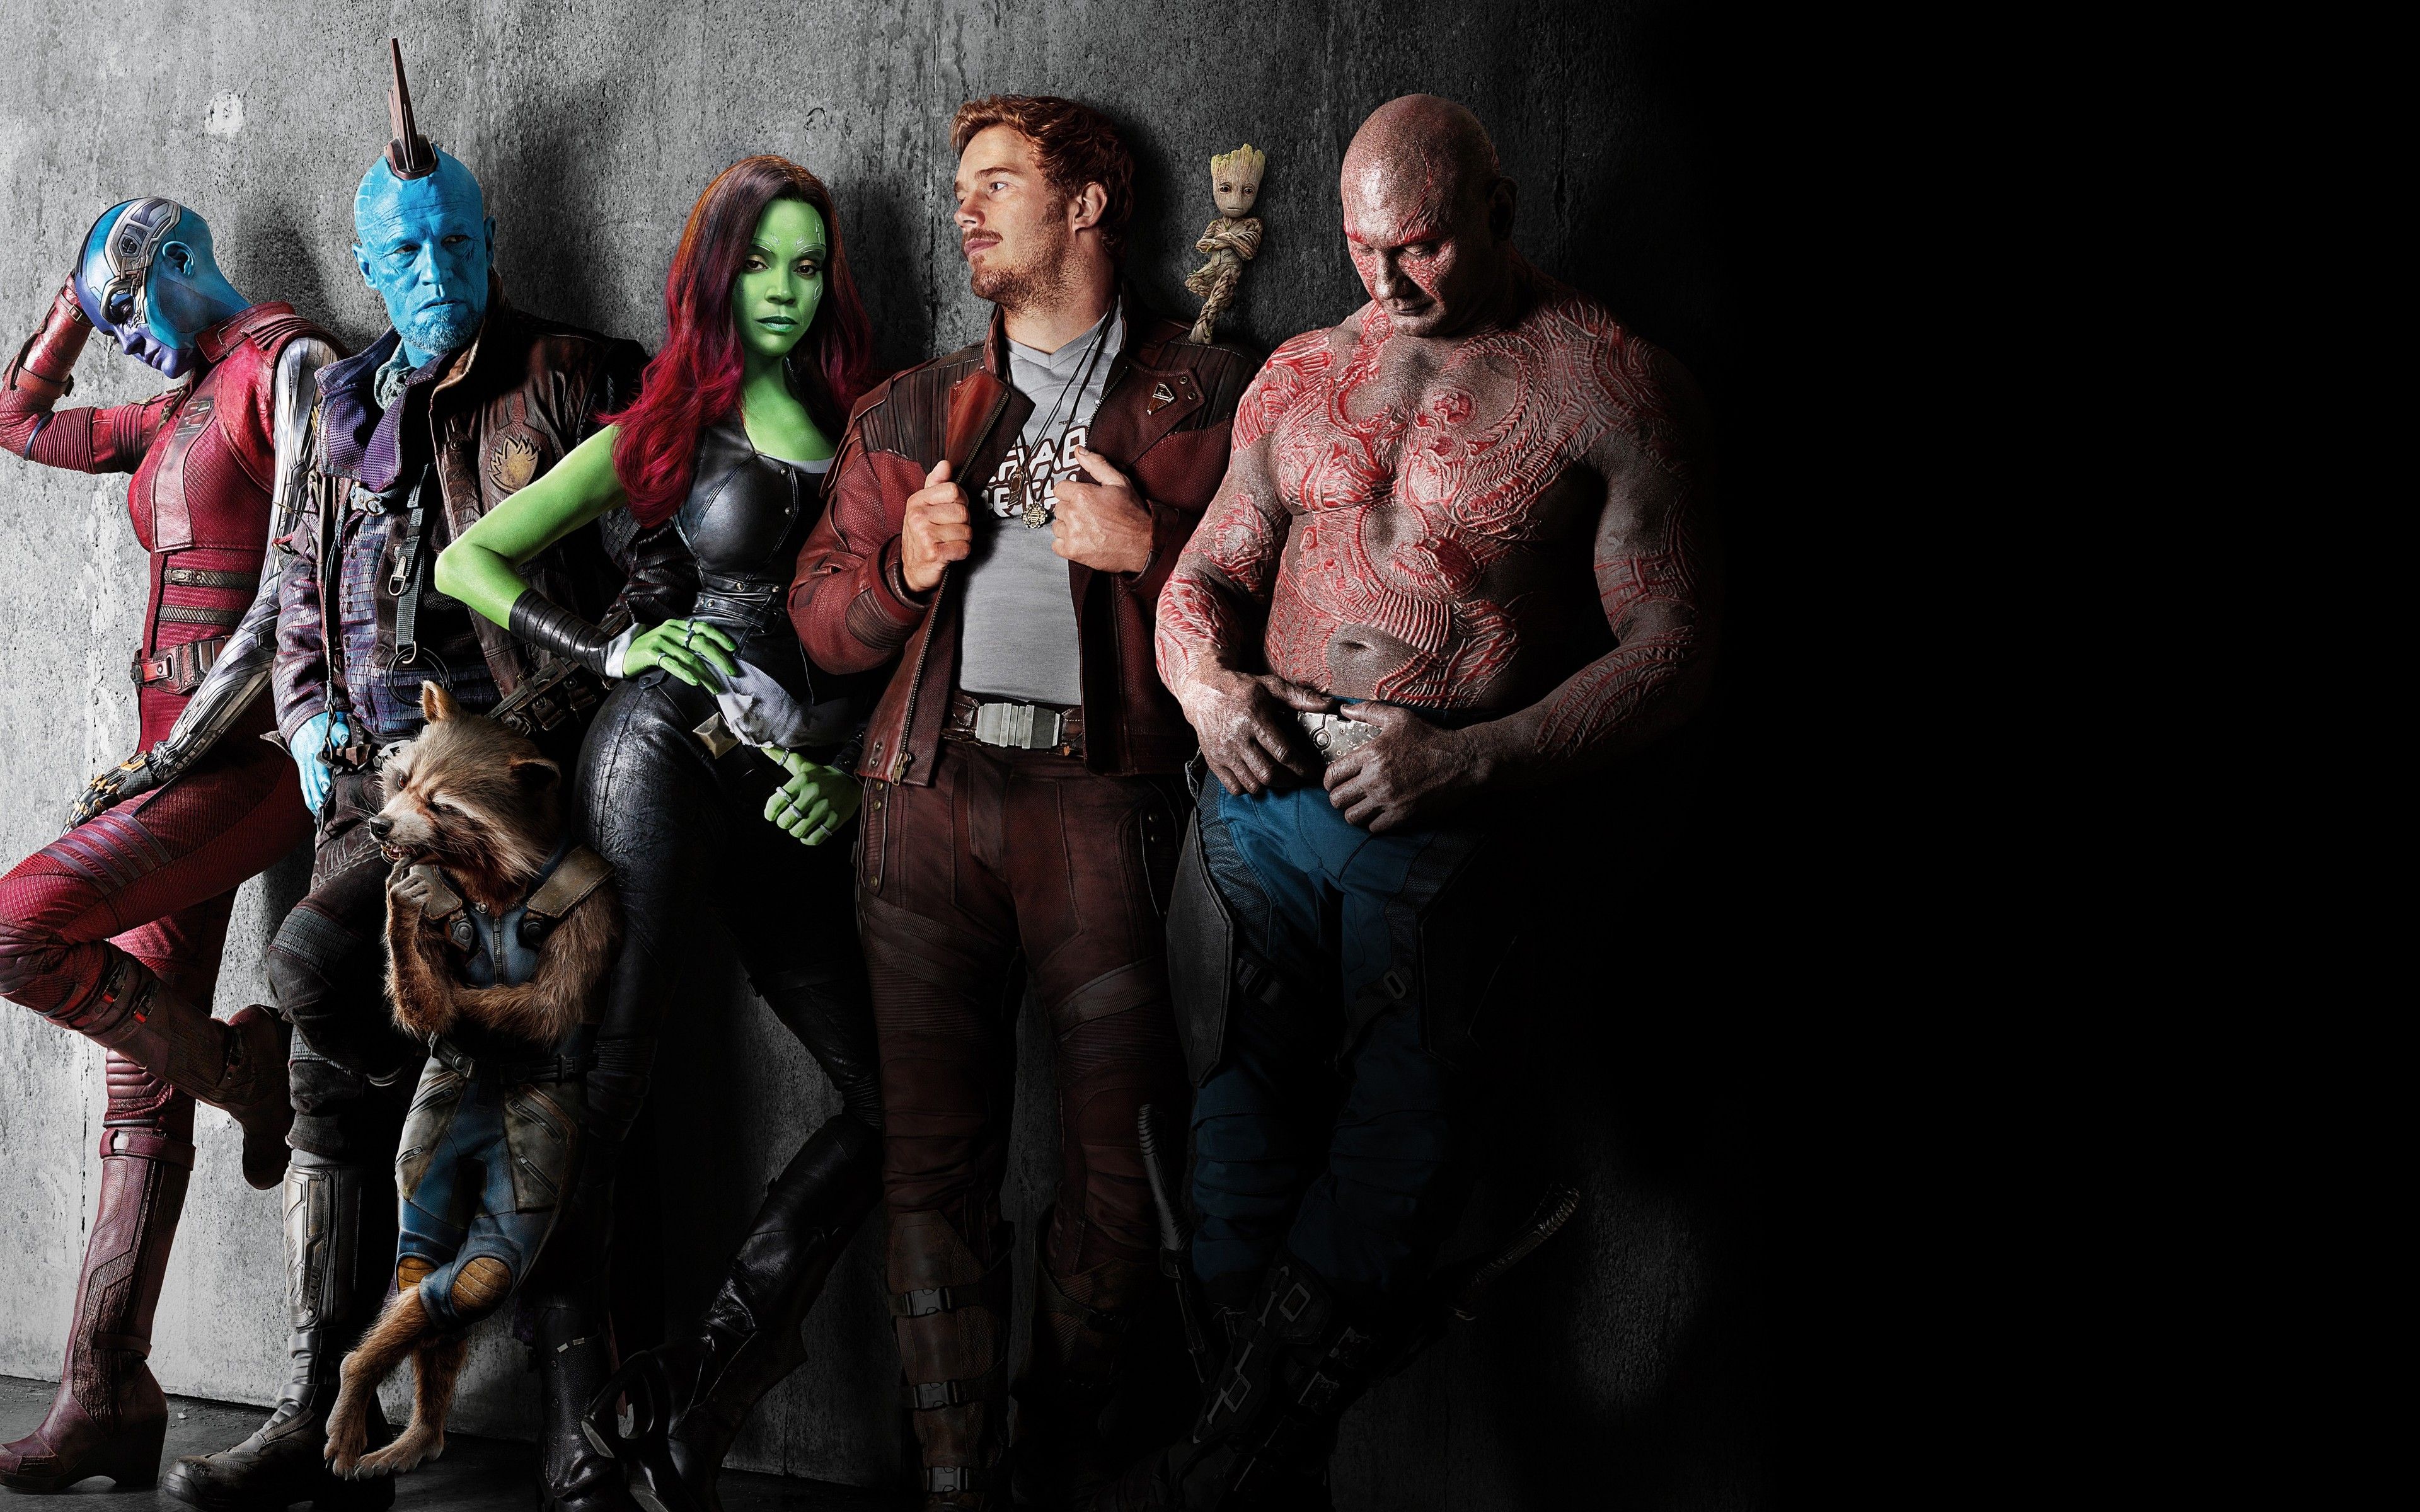 WHICH GUARDIANS OF THE GALAXY CHARACTER ARE YOU?